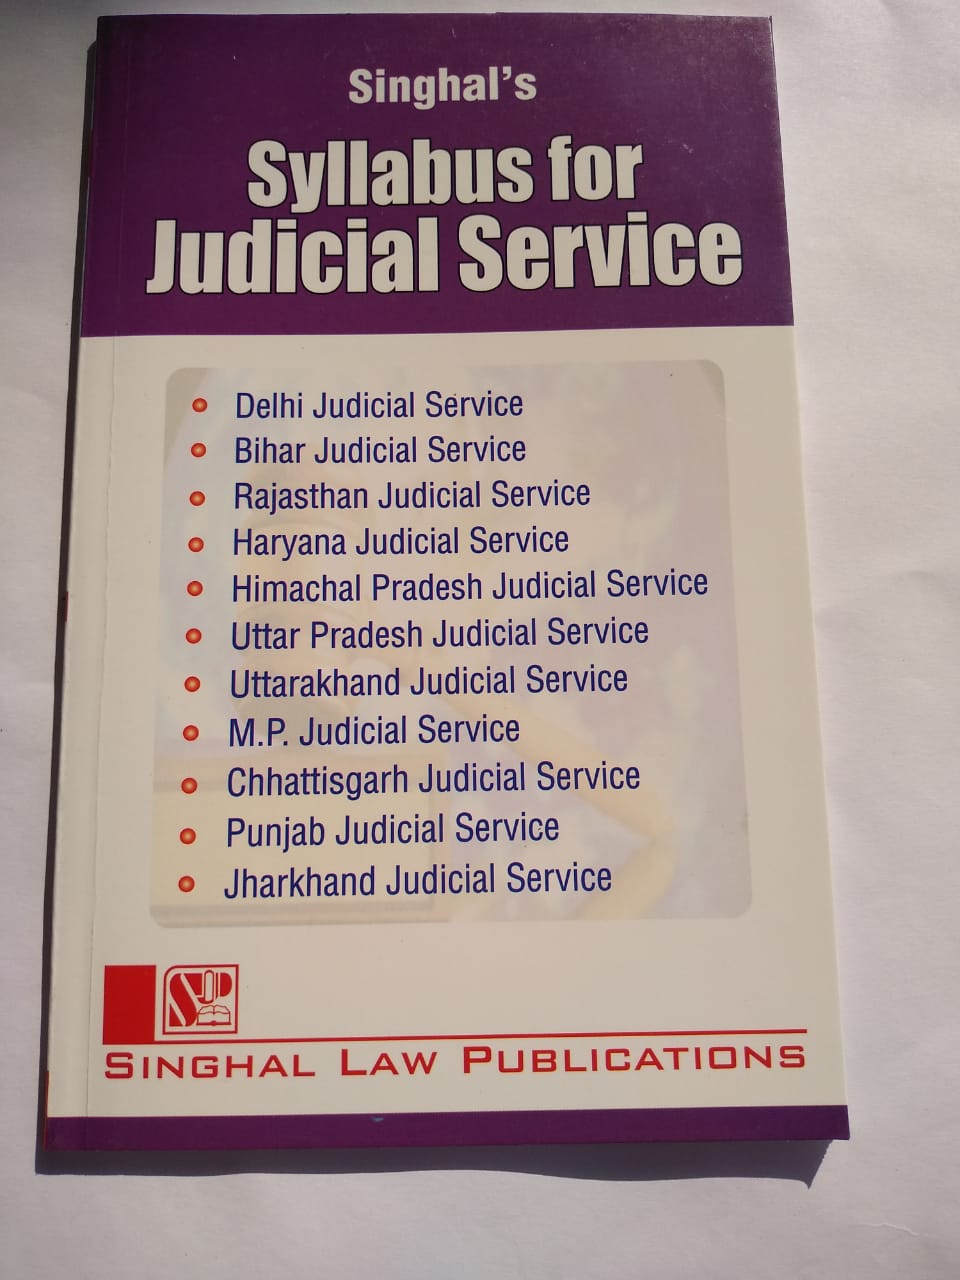 Singhal's Syllabus For Judicial Service